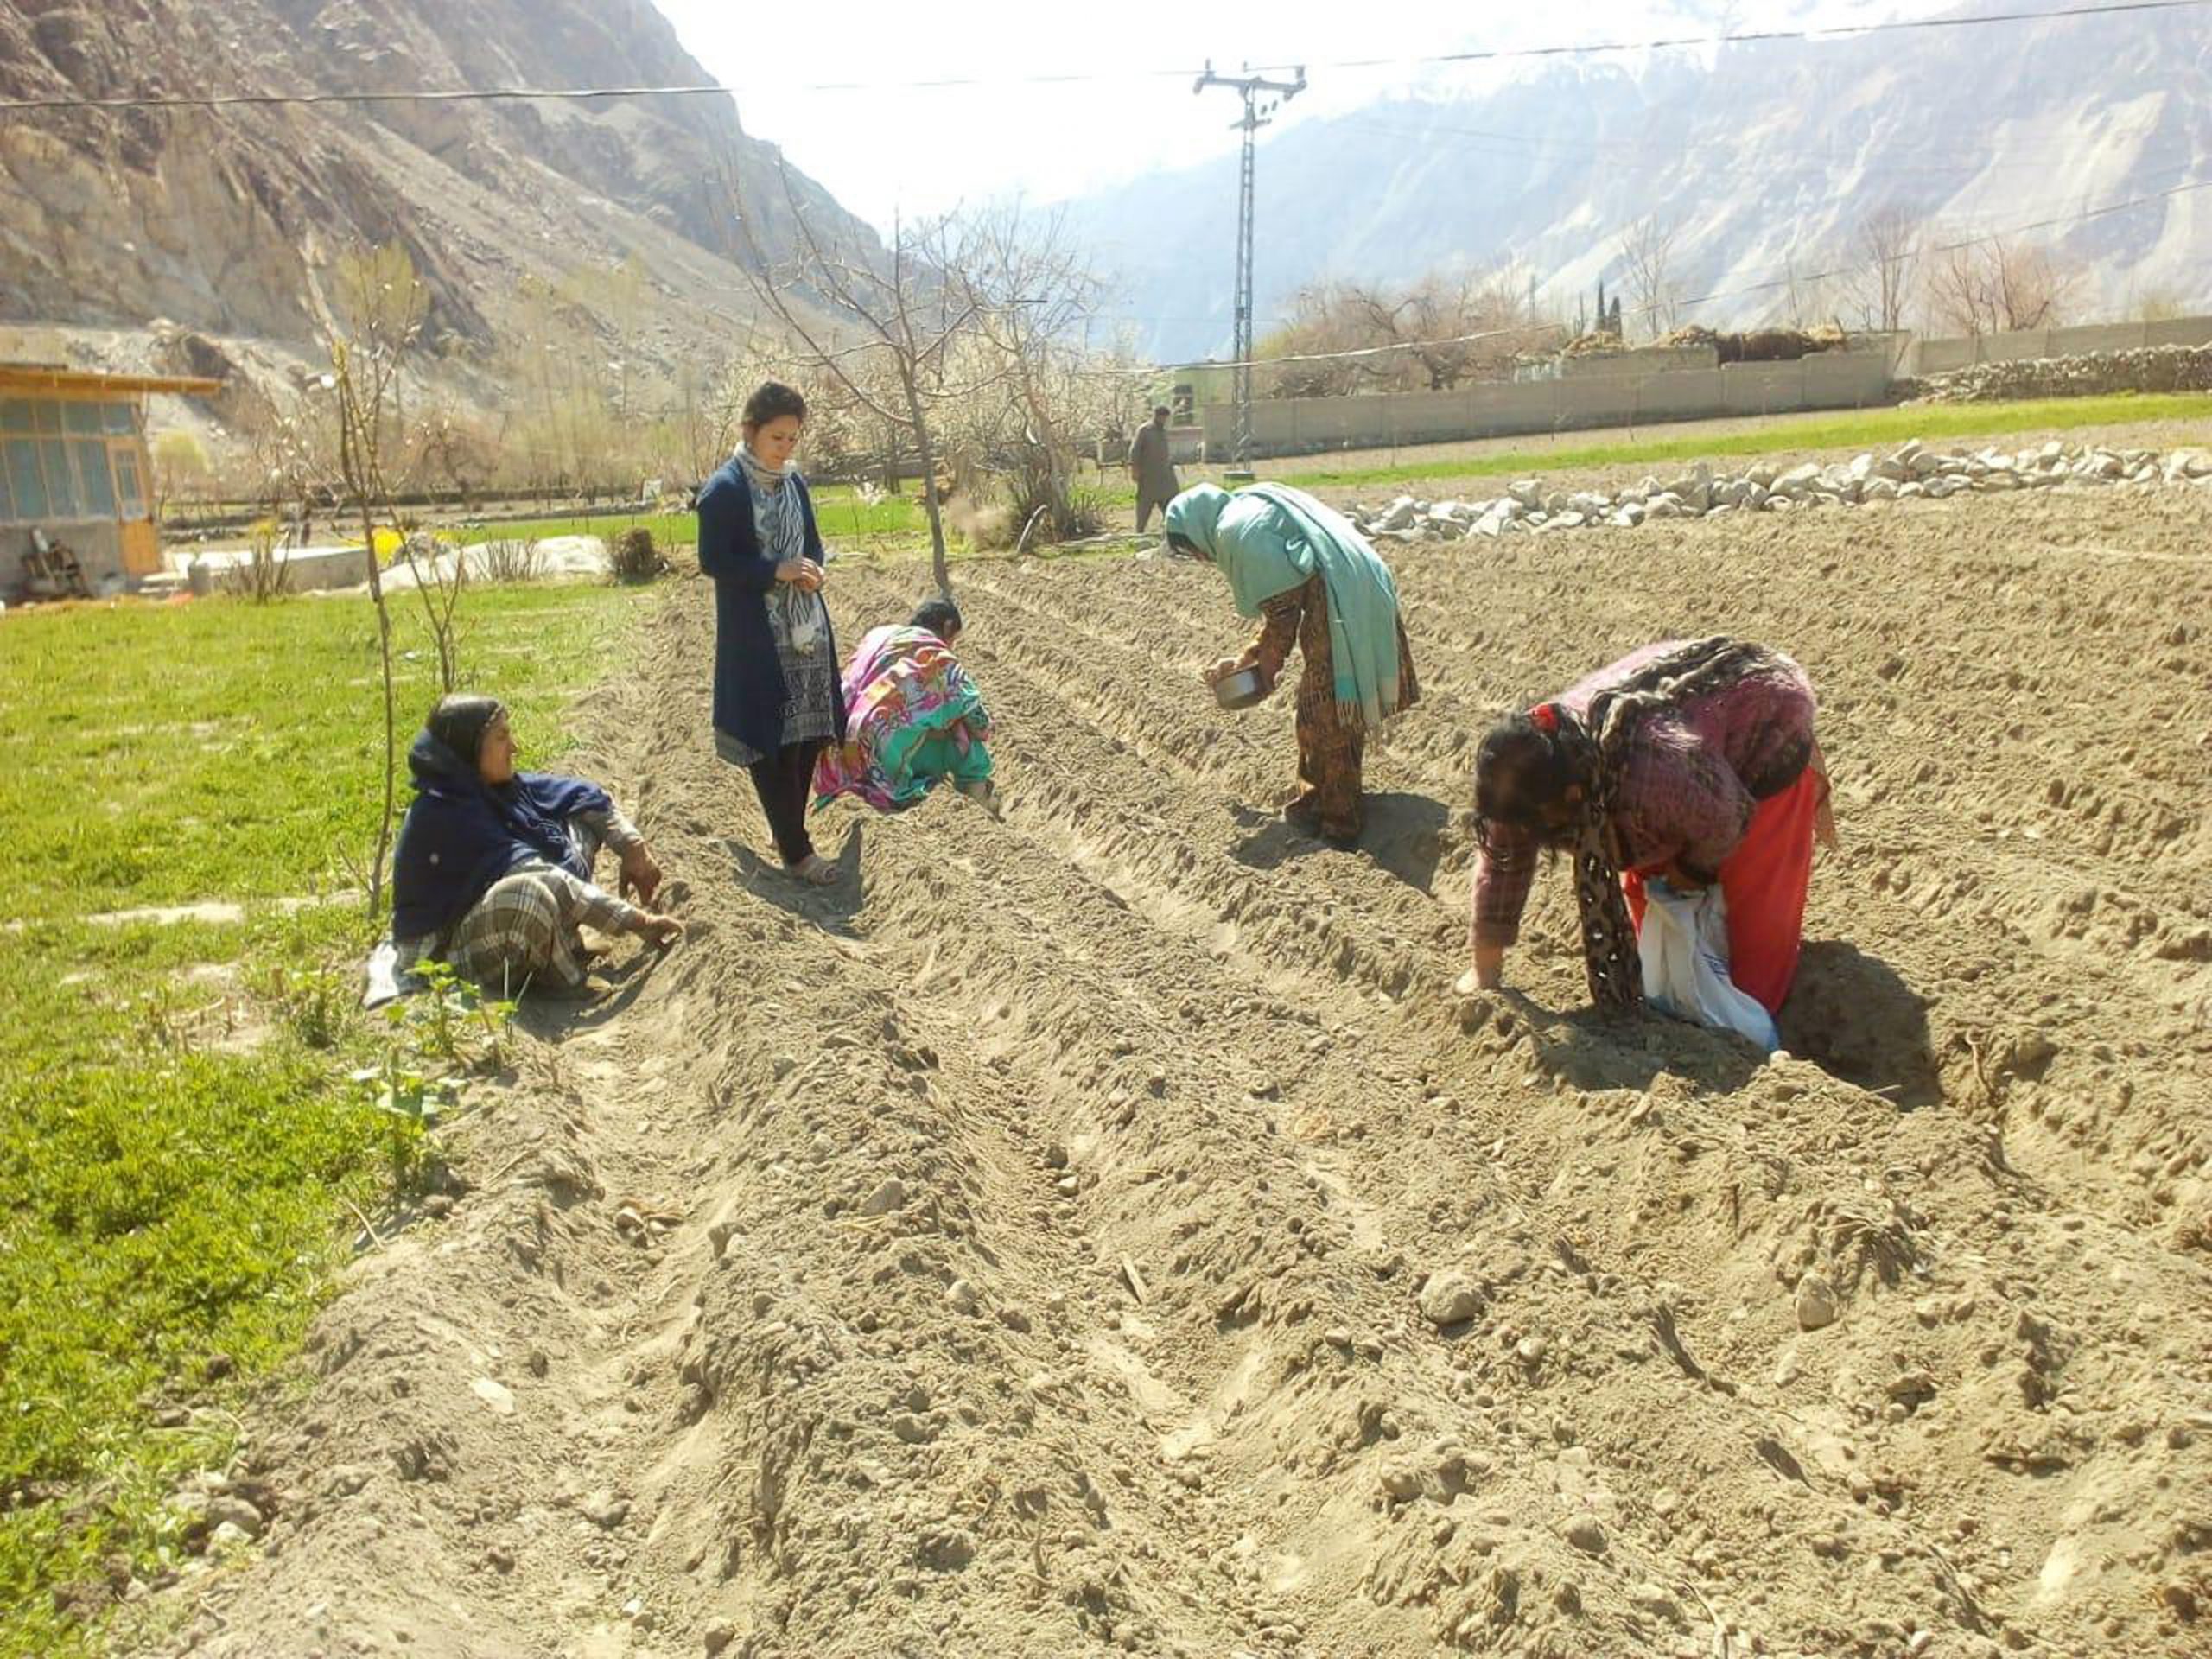 Prepration of field for gladioulous sowing time for Gilgit Baltistan flower industry ( Rozina Baber )